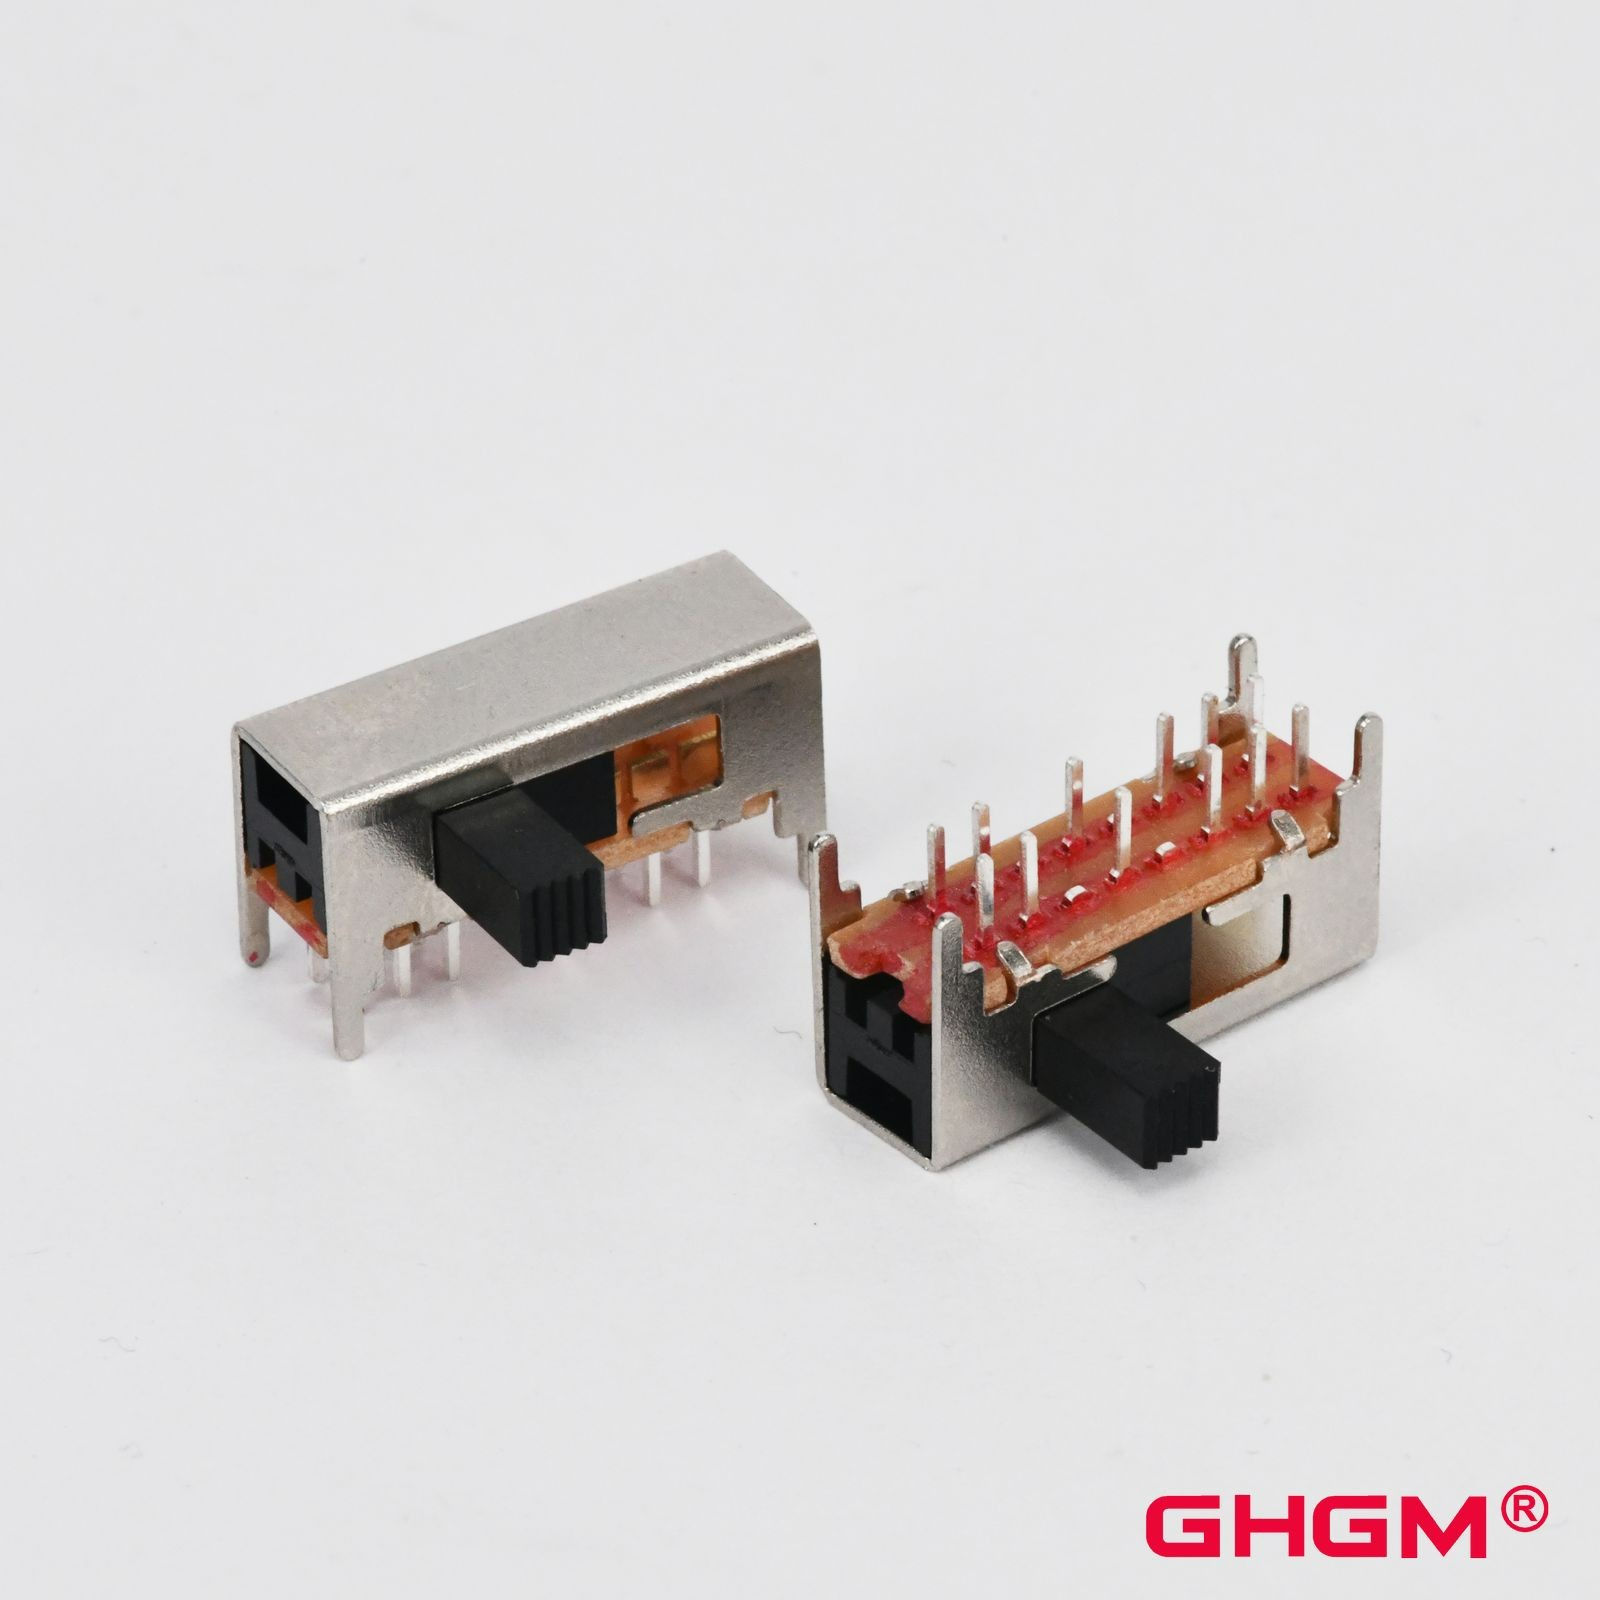 GH25D02 2 row, 5 position, Right Angle, Slide Switch SMT DIP